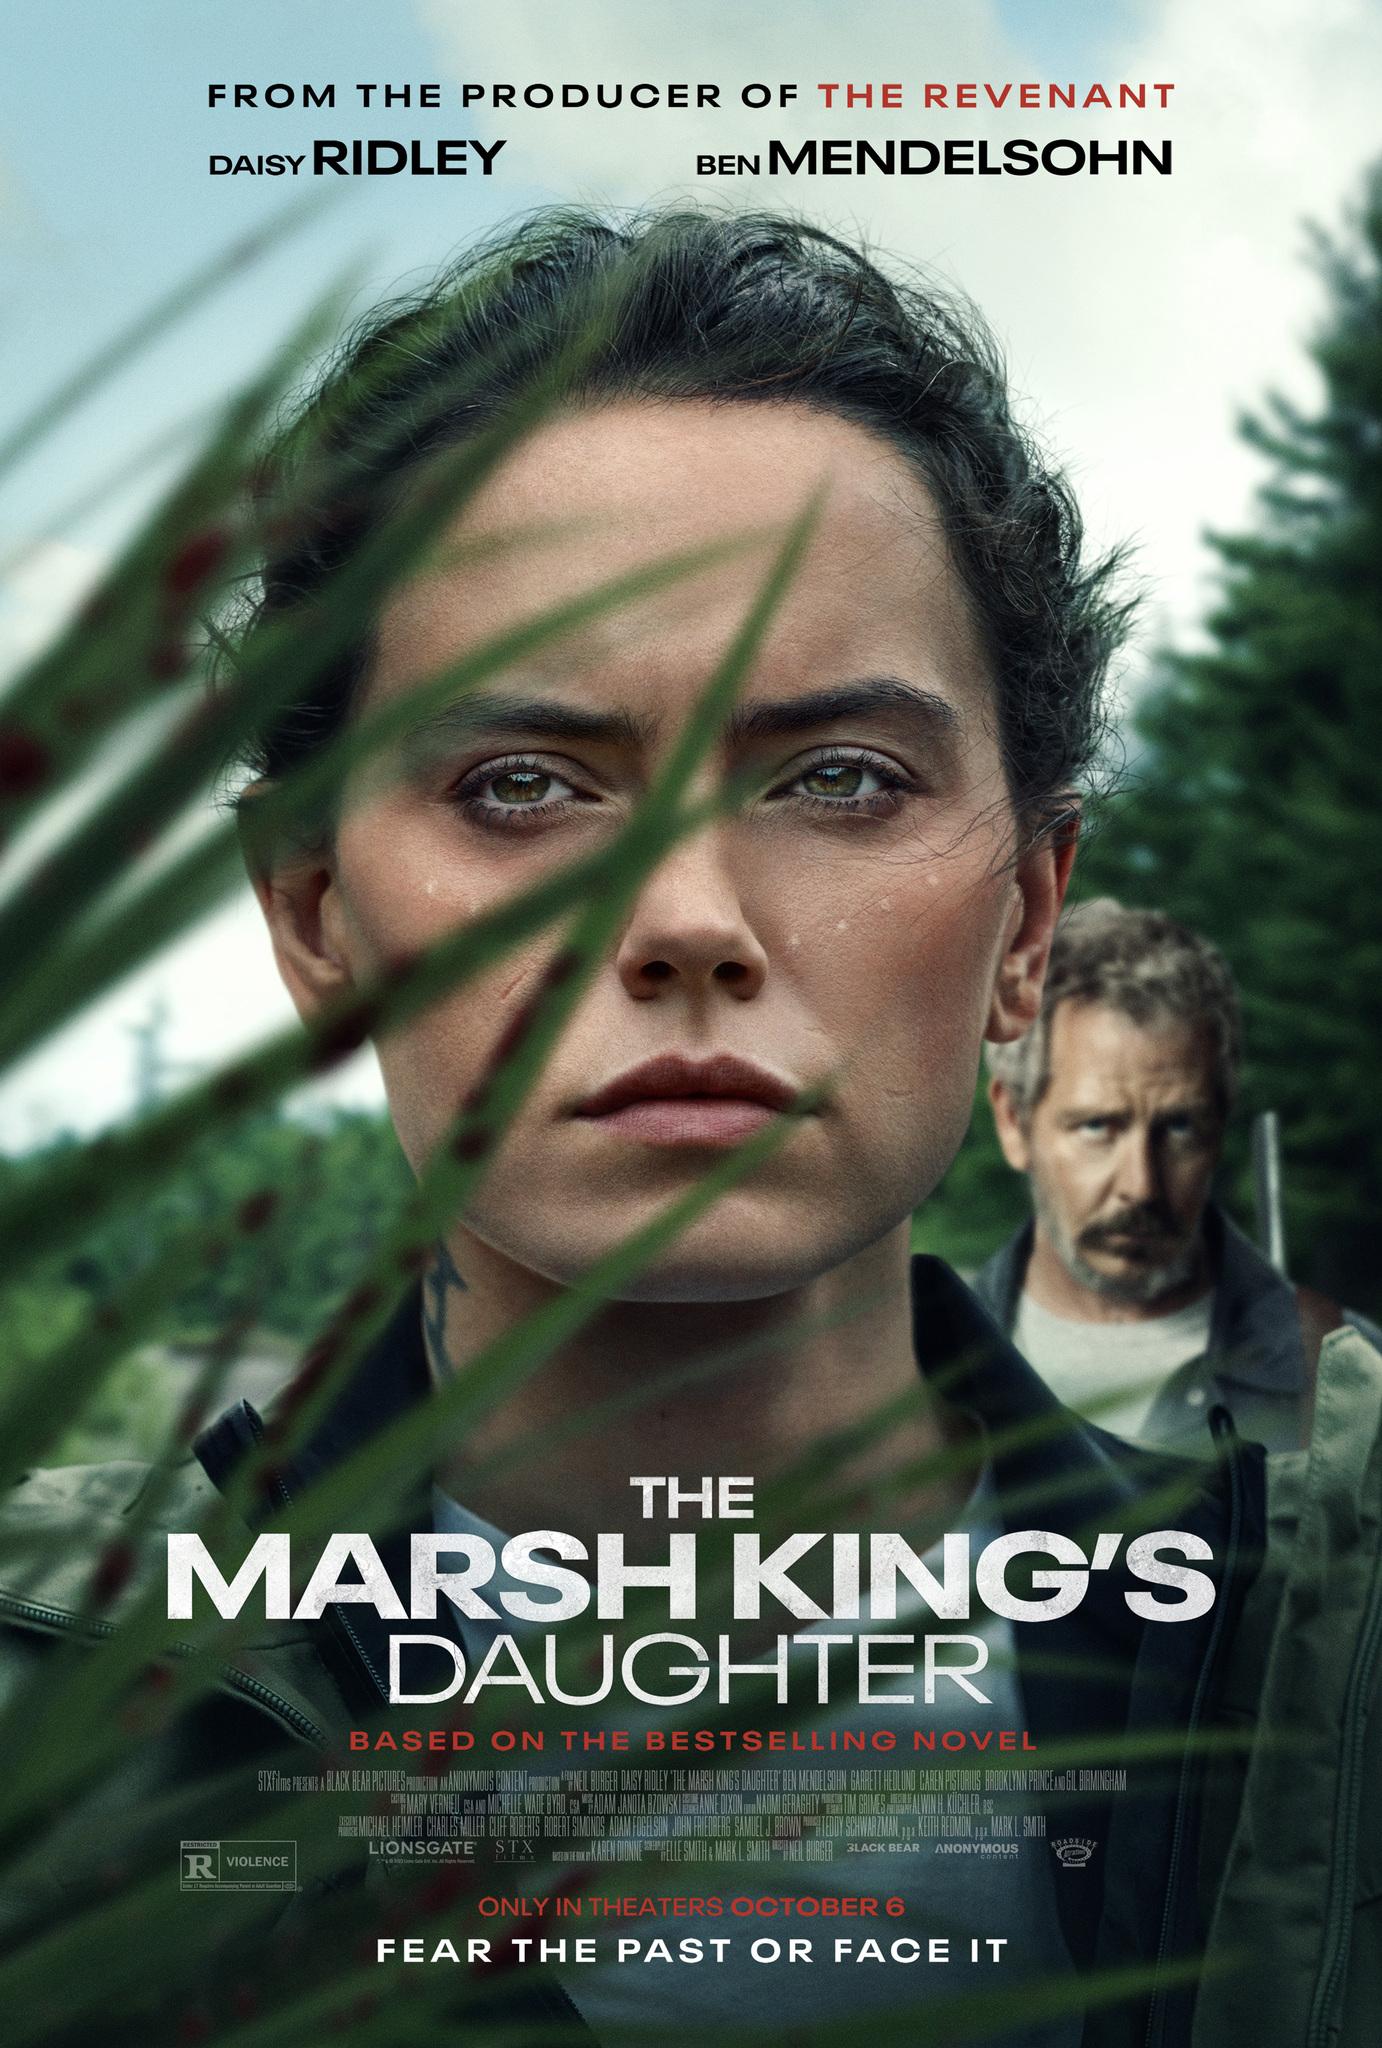 The Marsh King’s Daughter (Streaming on Lionsgate Play) - May 10Brace yourself for a gritty psychological thriller in 